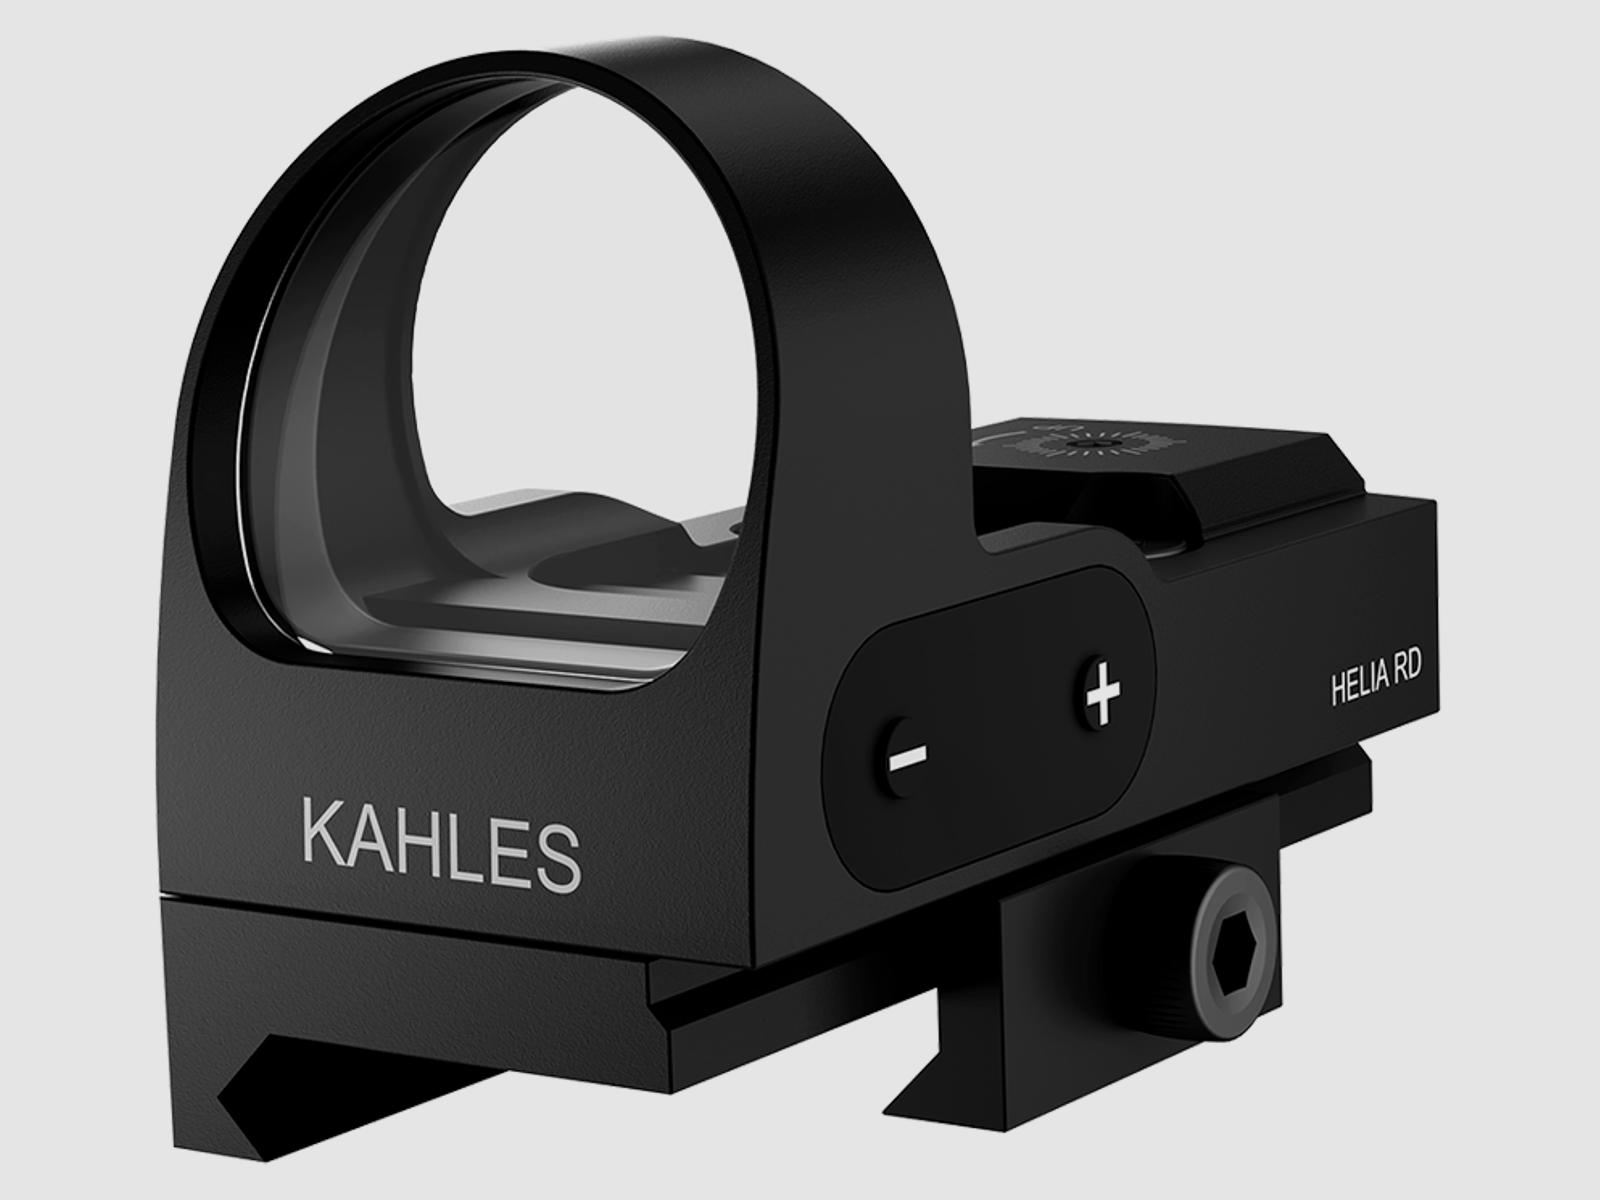 Kahles Helia RD Montagesystem: Docter sight / Meosight / CompactPoint